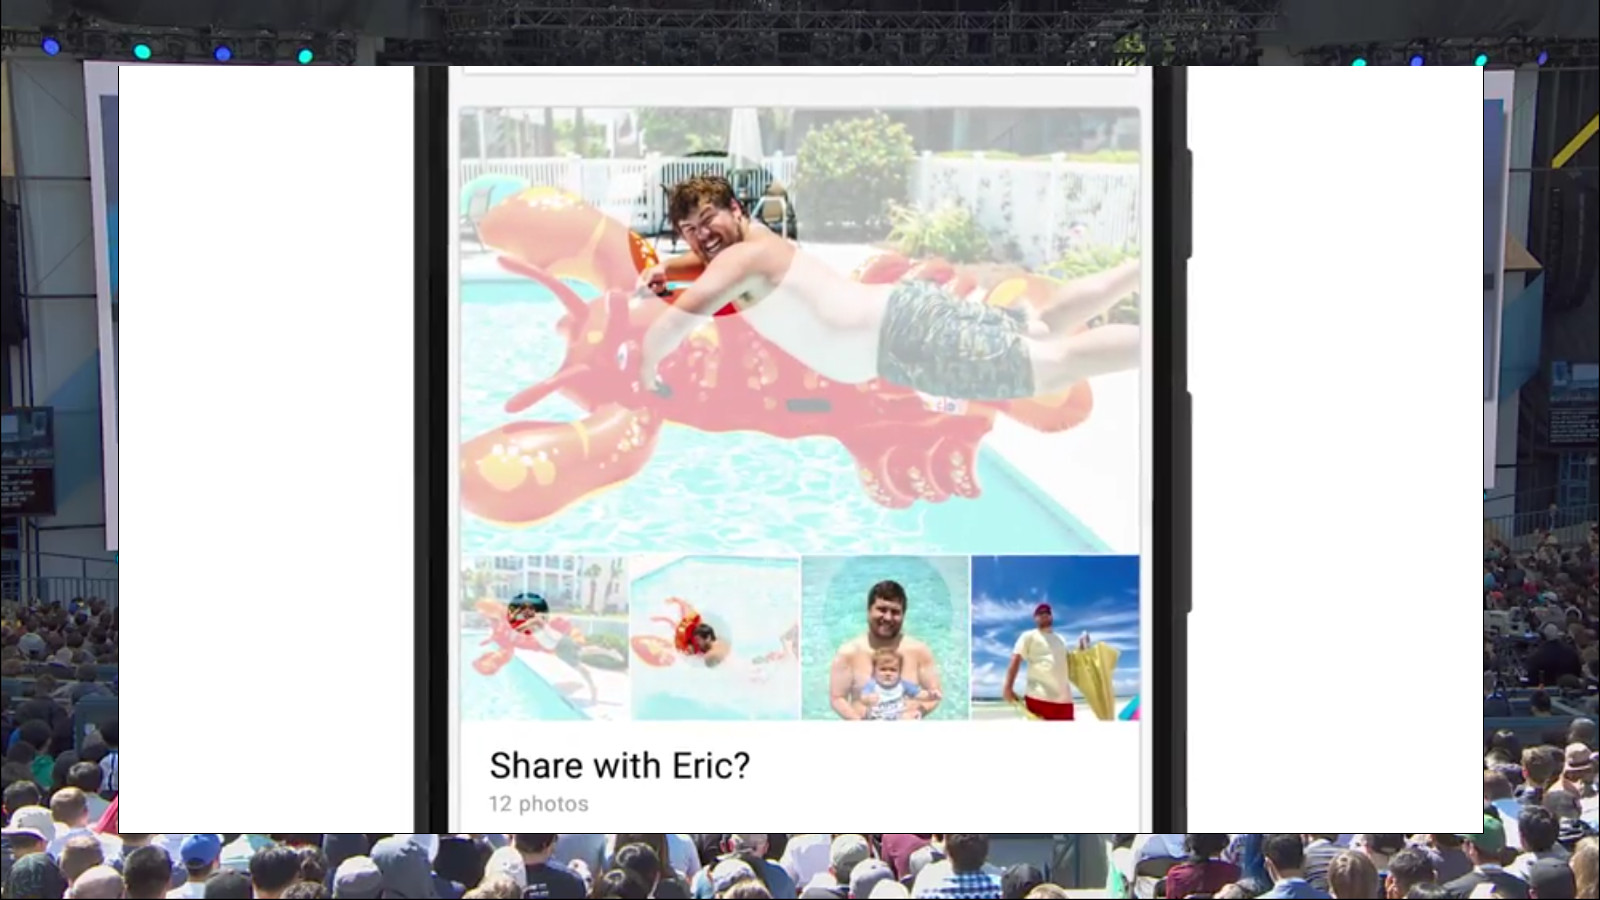 google photos suggested sharing